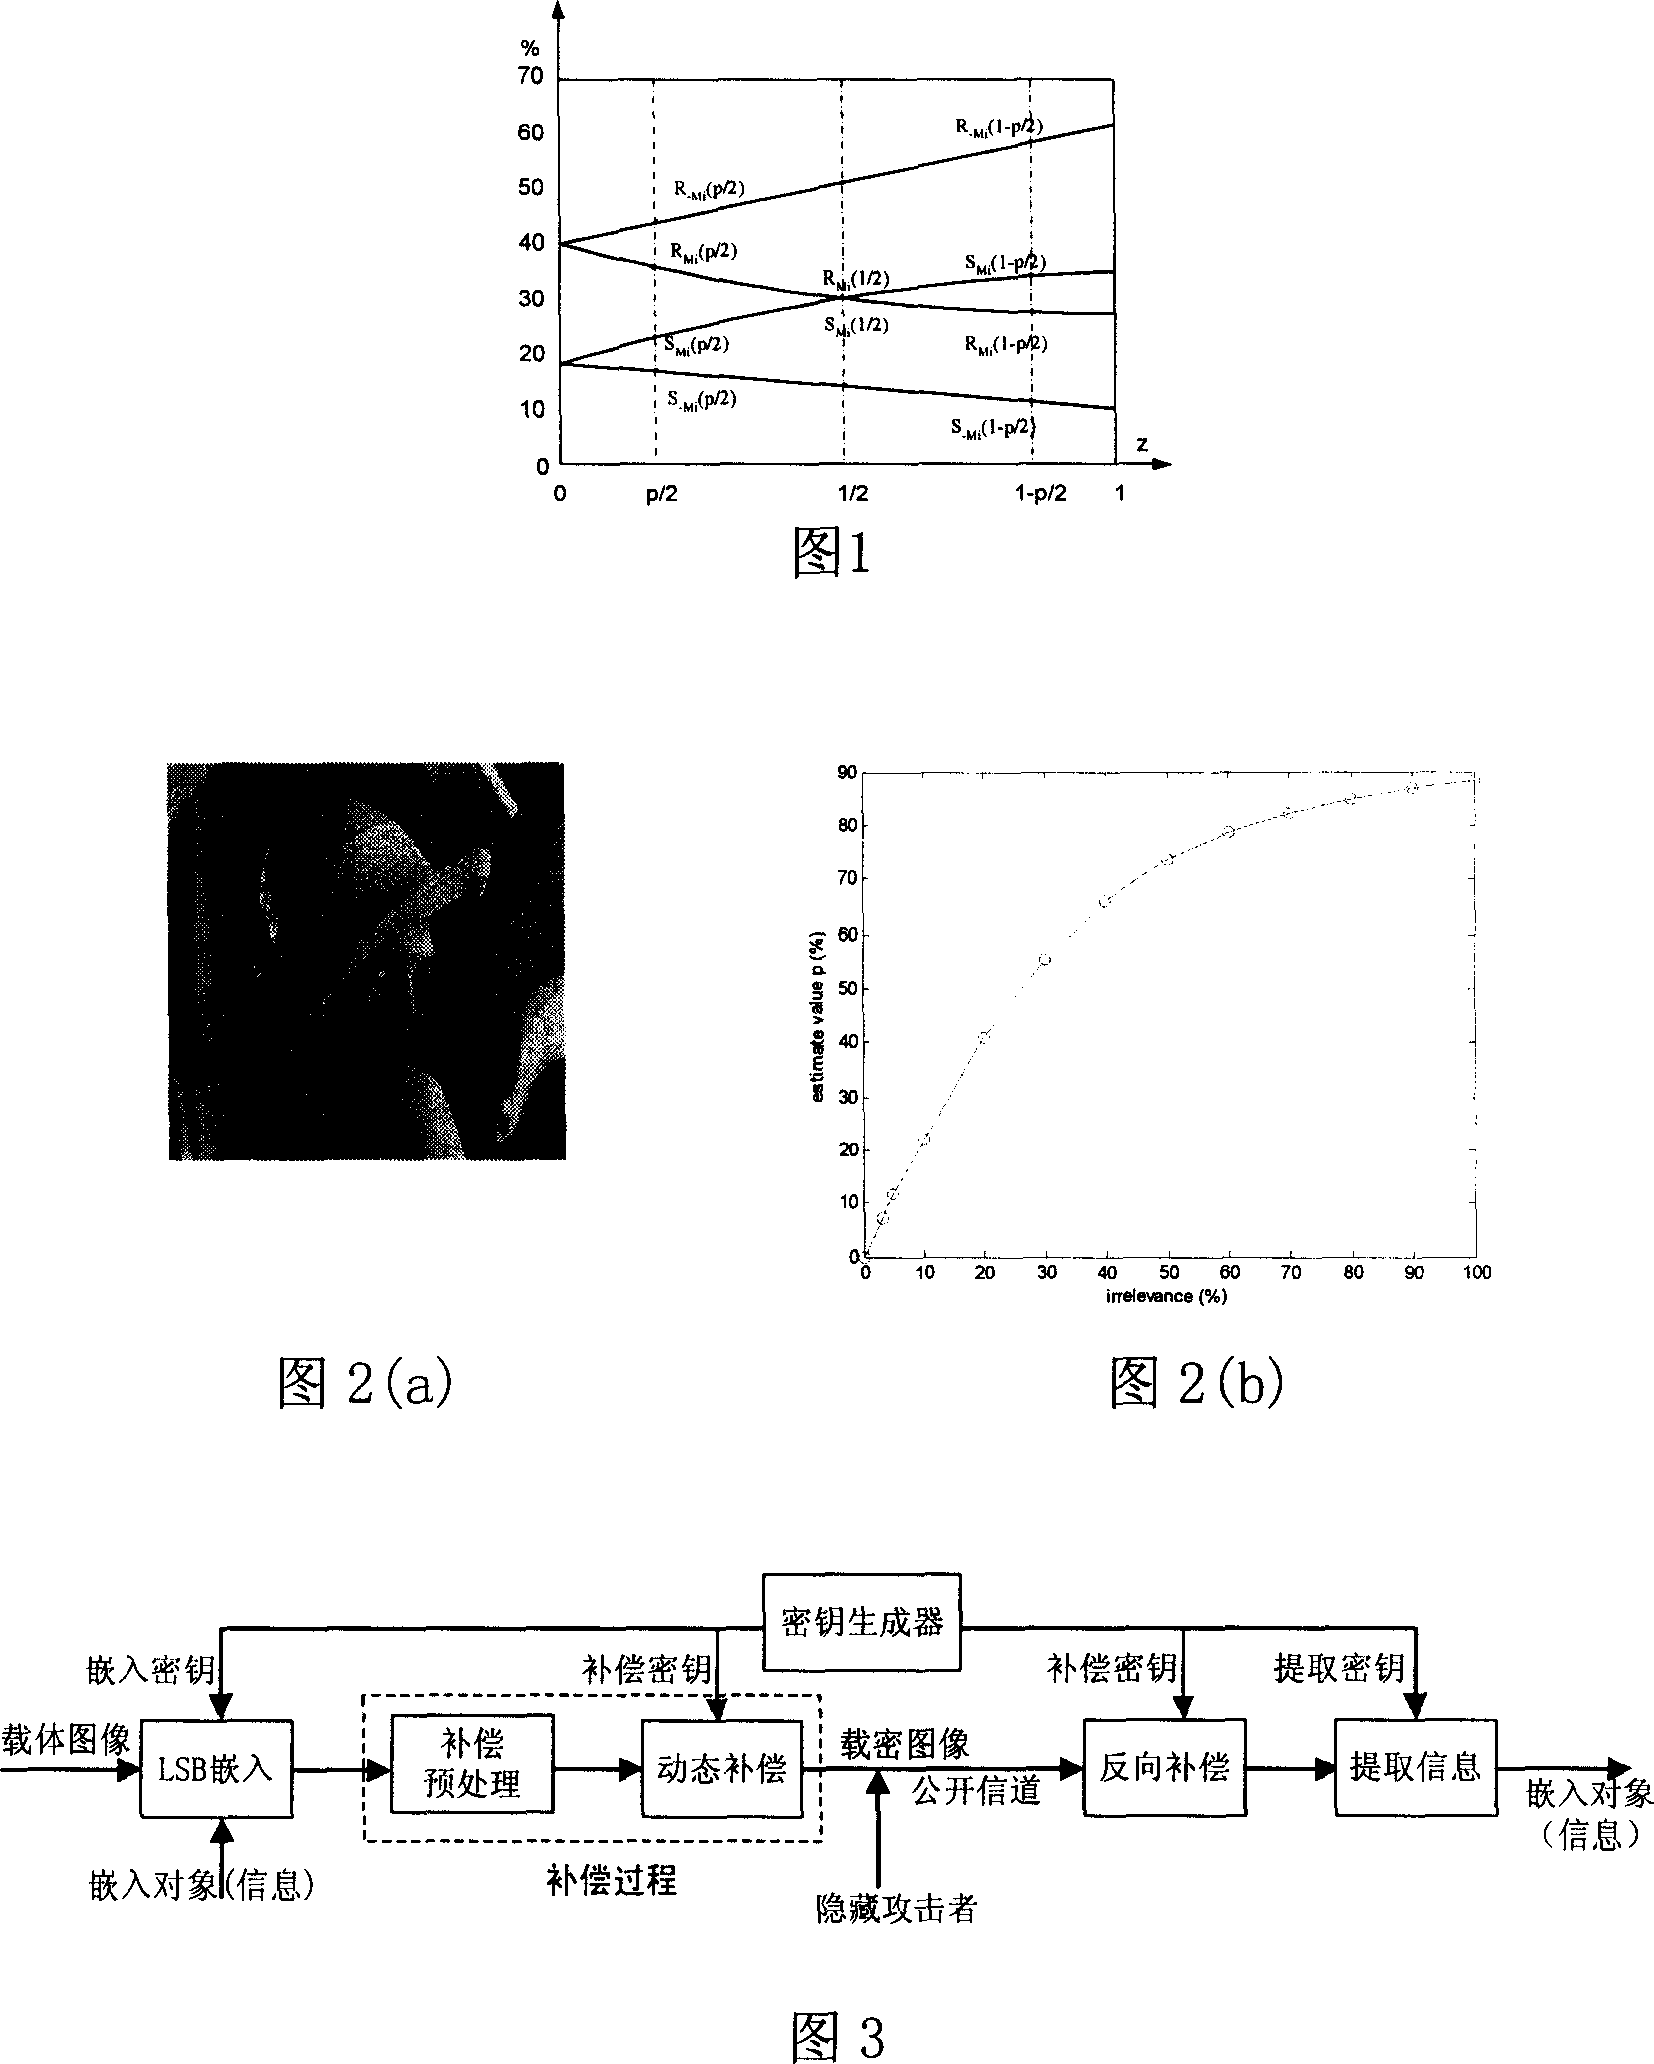 Antistatistical analysis image LSB information hiding method based on chaos system